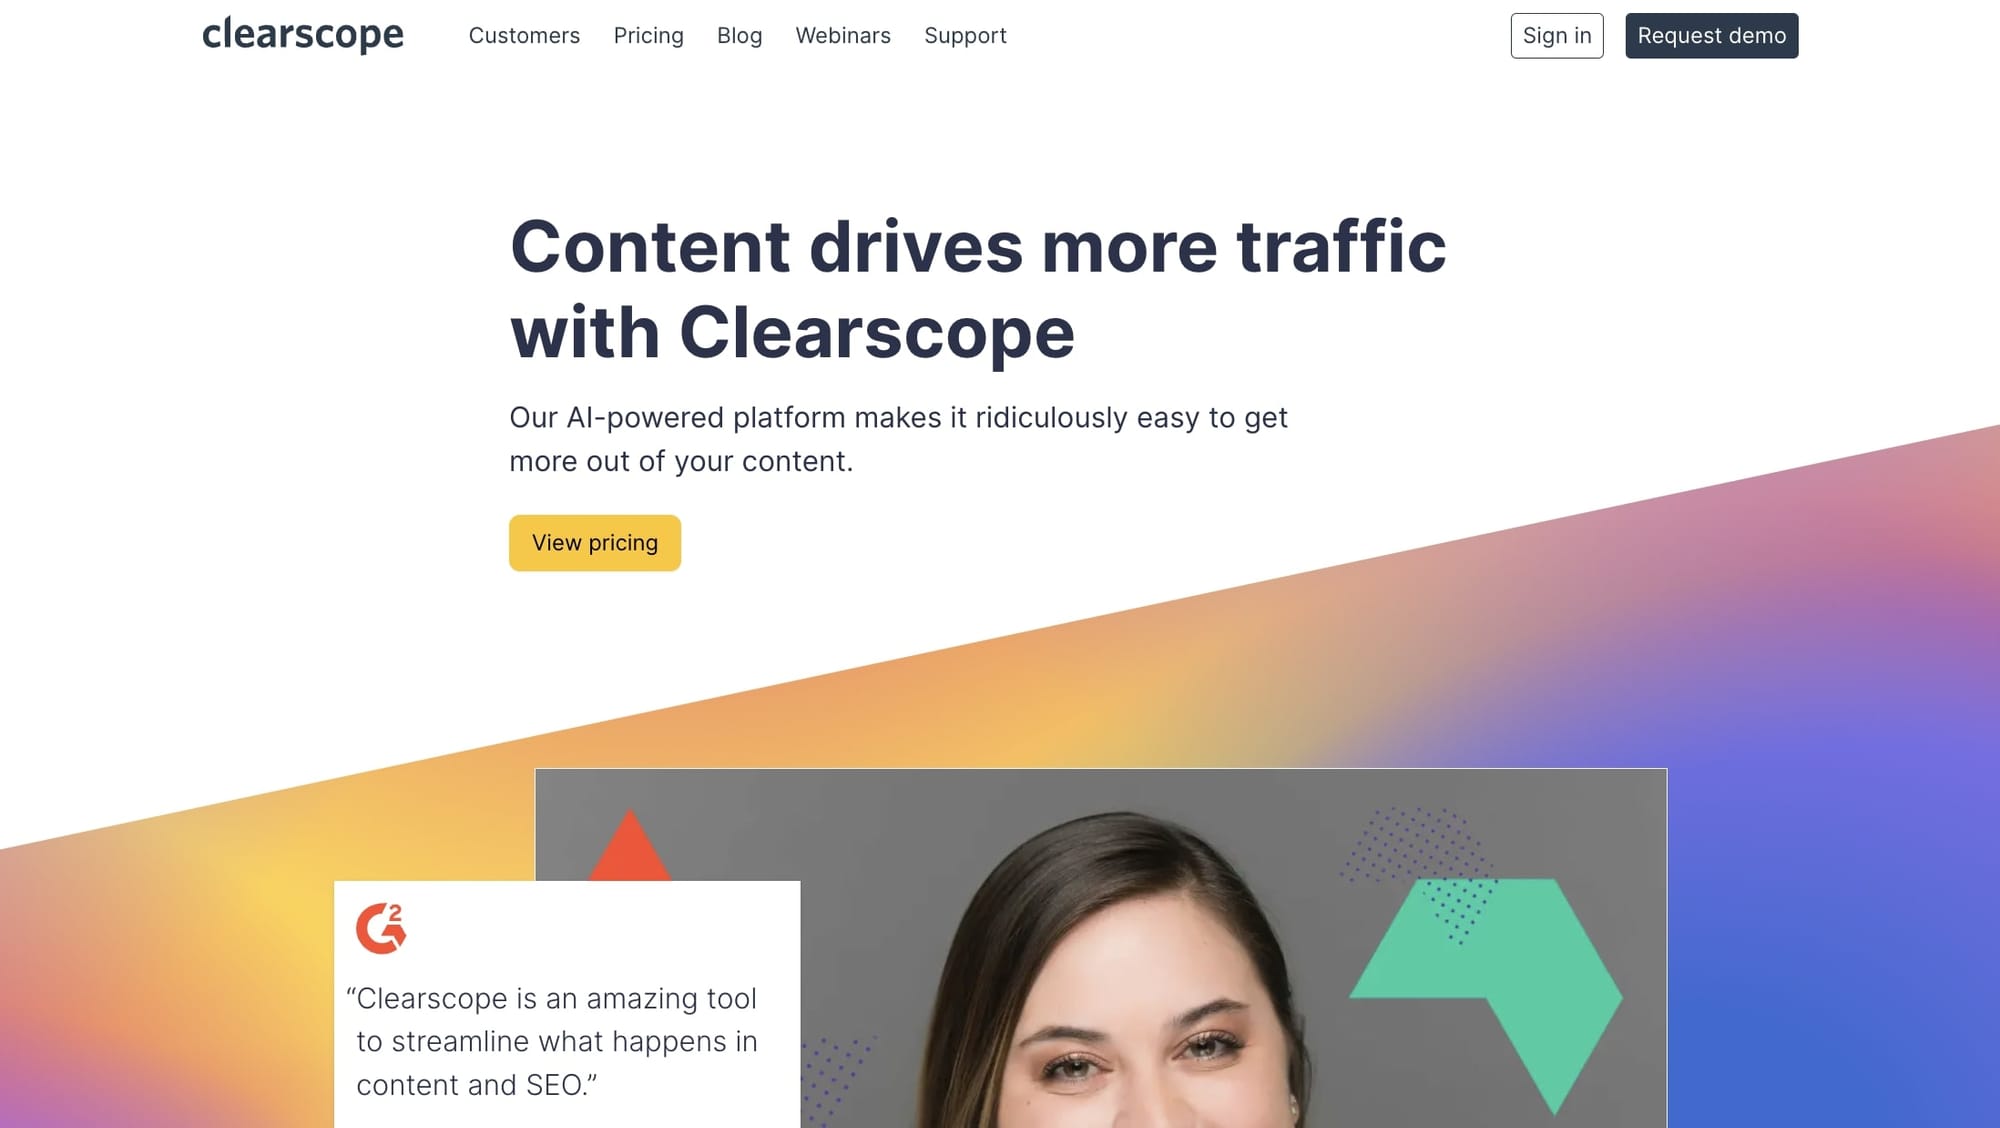 Clearscope for content optimizations